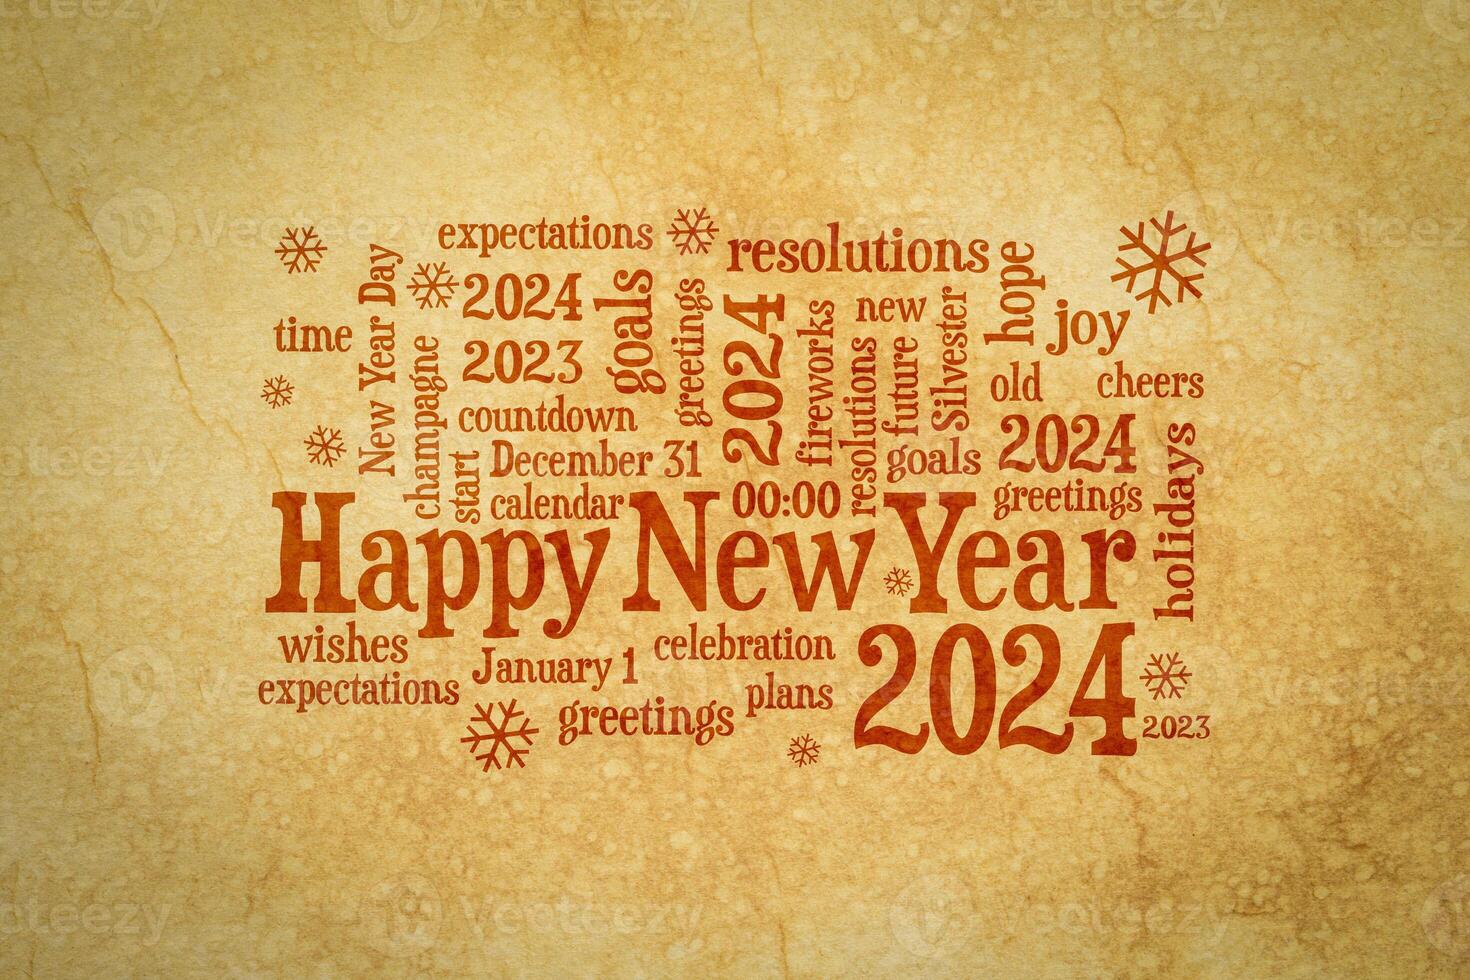 Happy New Year 2024 greetings card  - word cloud on a retro handmade paper photo